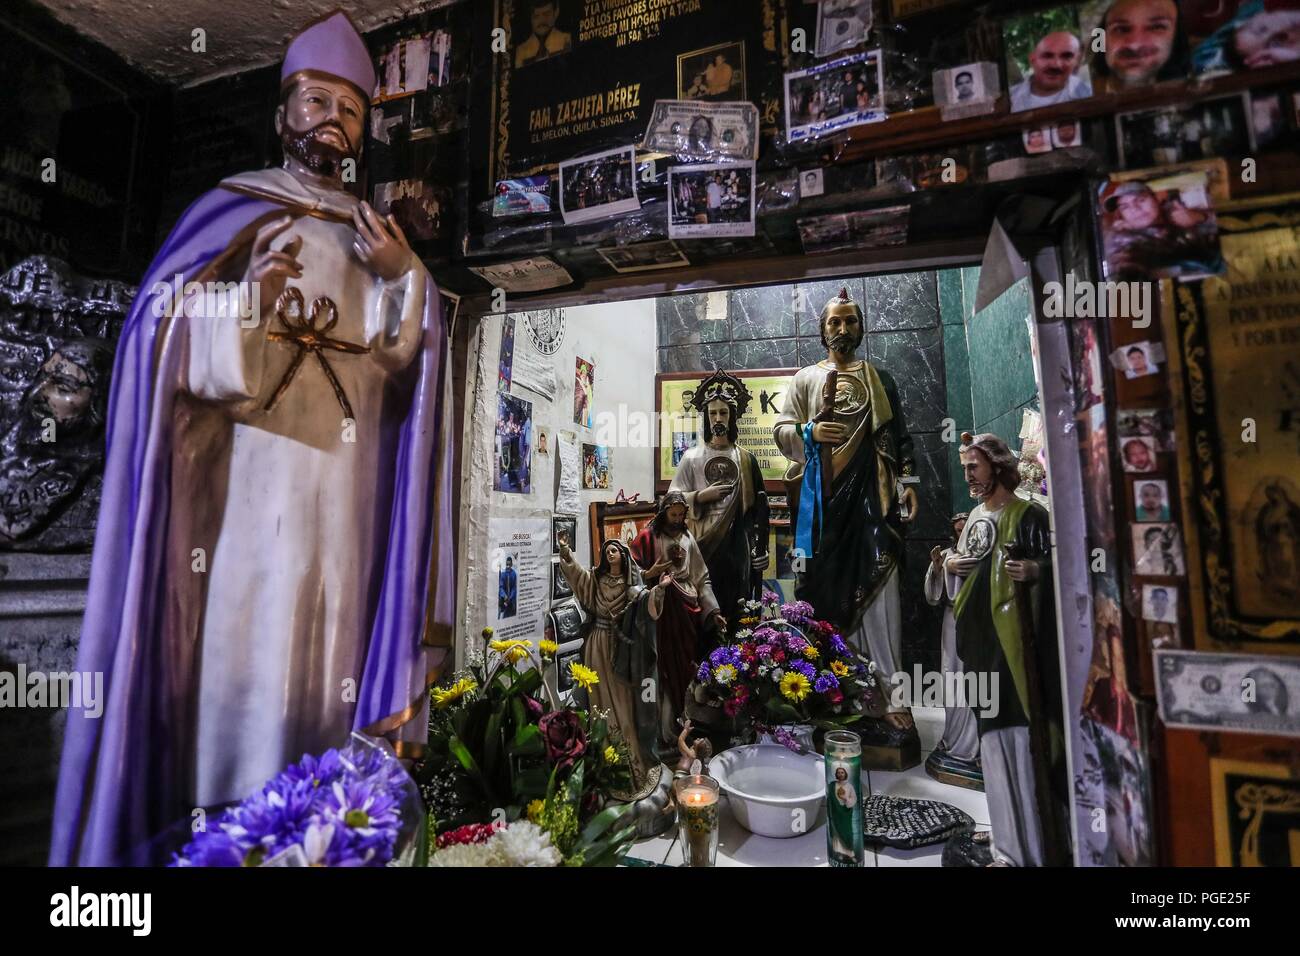 Altar in honor of Jesús Malverde who is revered as Saint who every day attracts hundreds of followers to his chapel in Culiacan Sinaloa. iglecia, Stock Photo